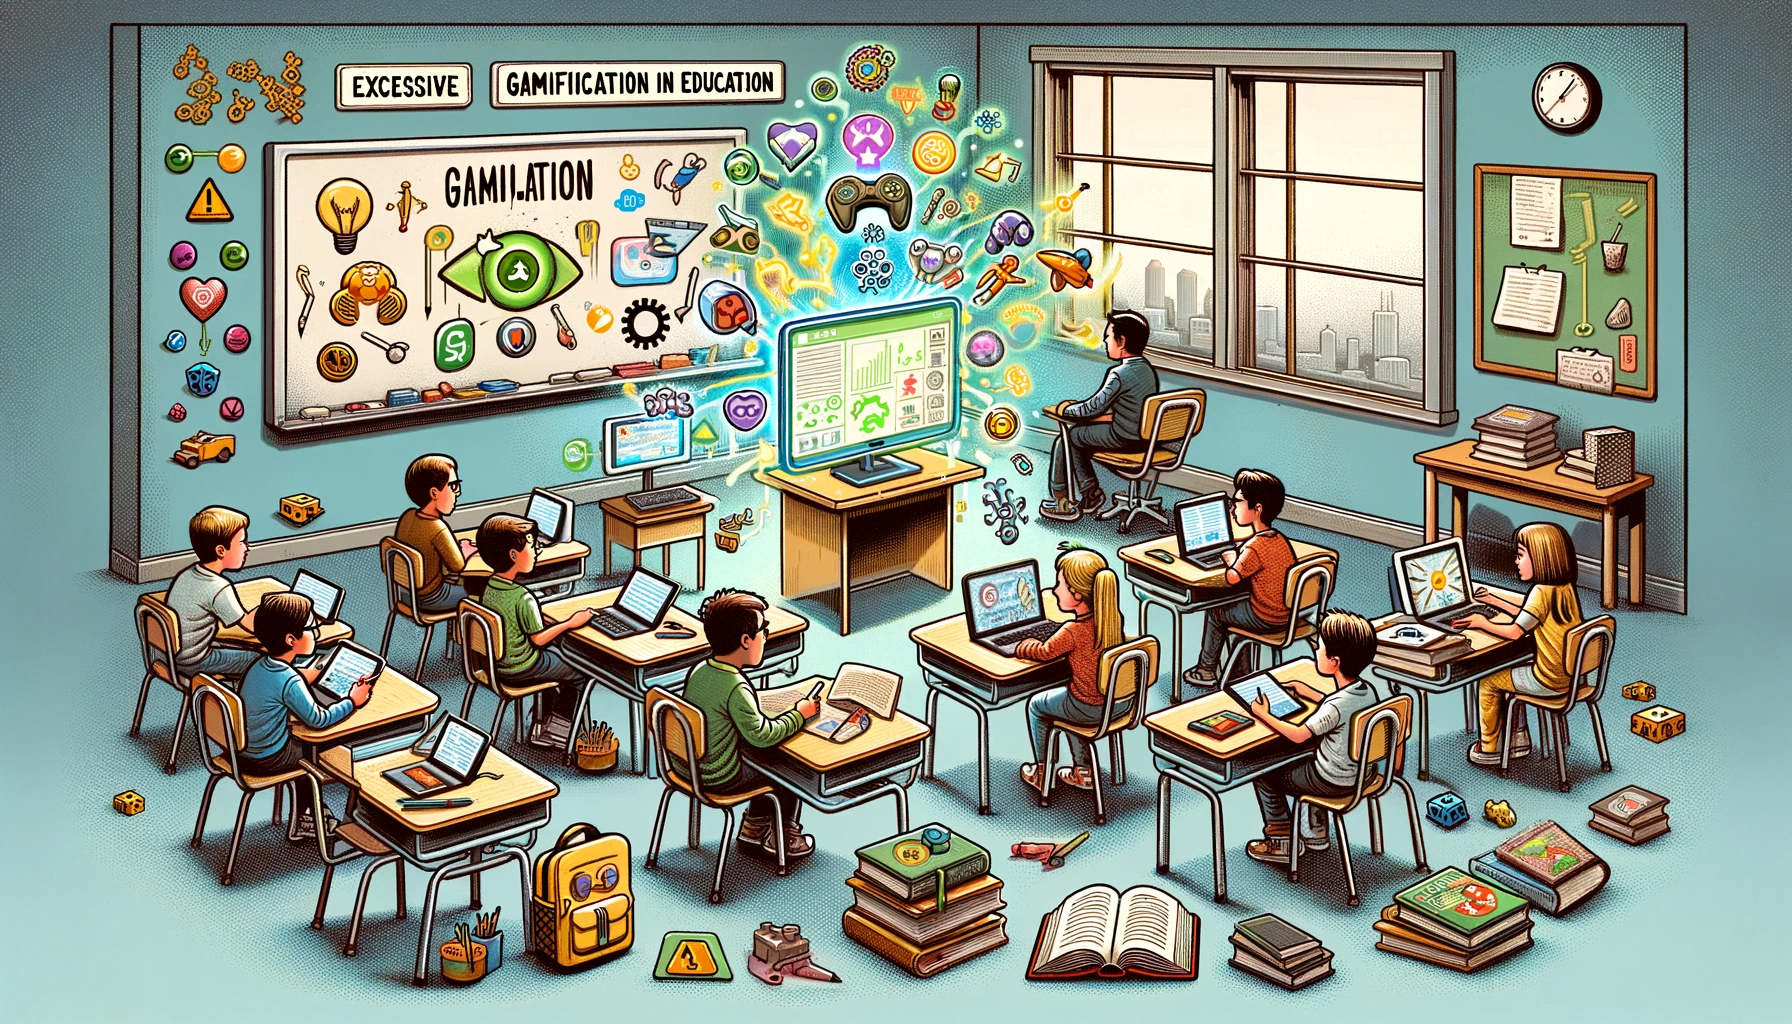 Overly gamified classroom distracting students from learning material.